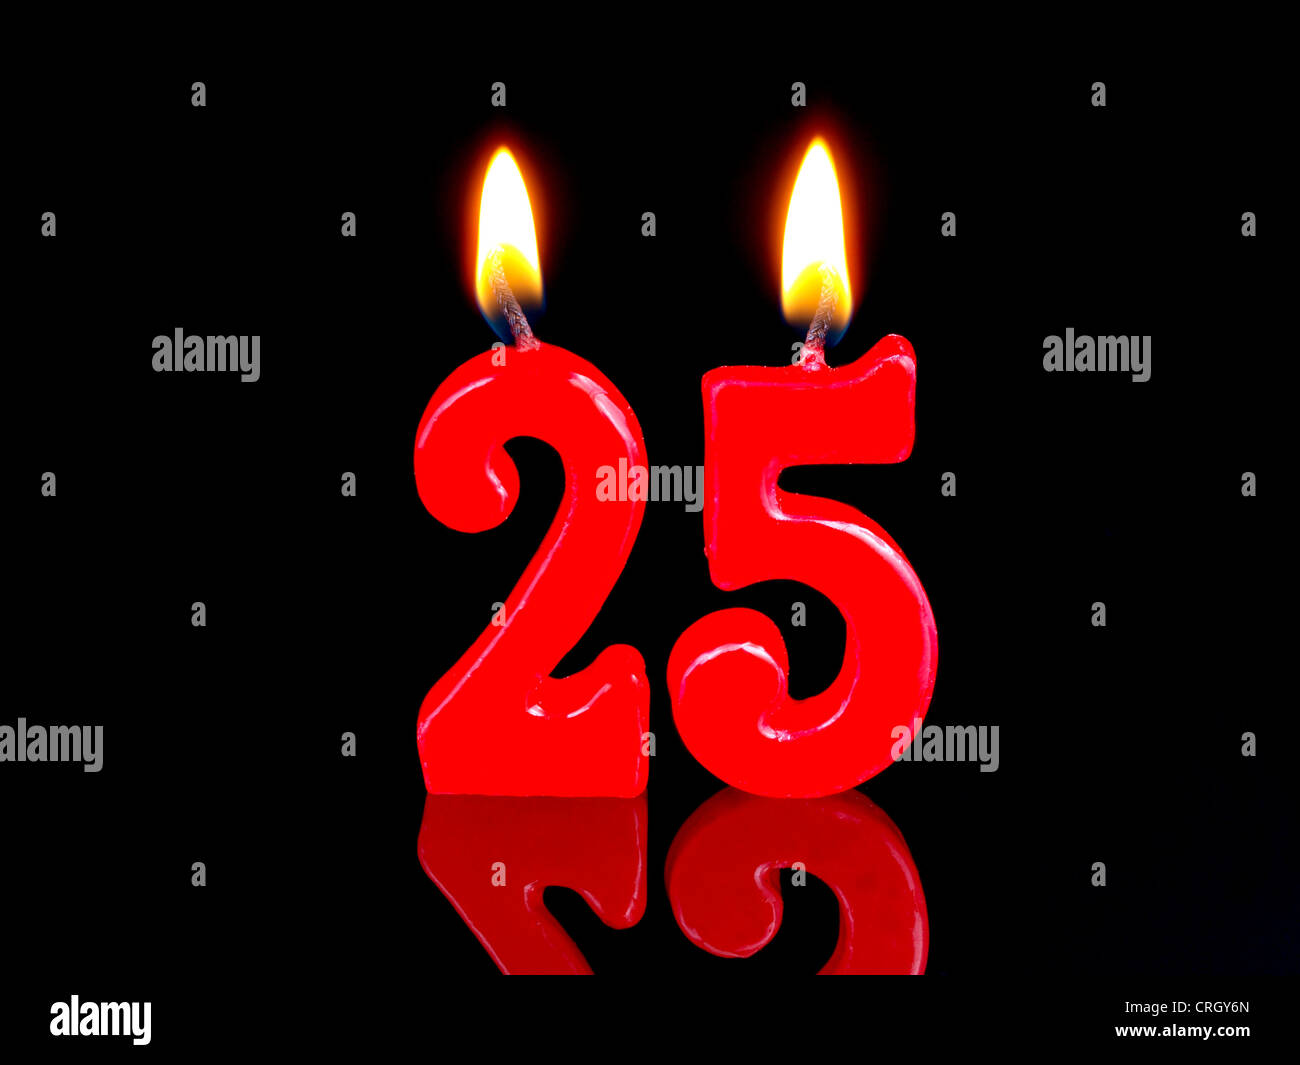 Birthday-anniversary candles showing Nr. 25 Stock Photo